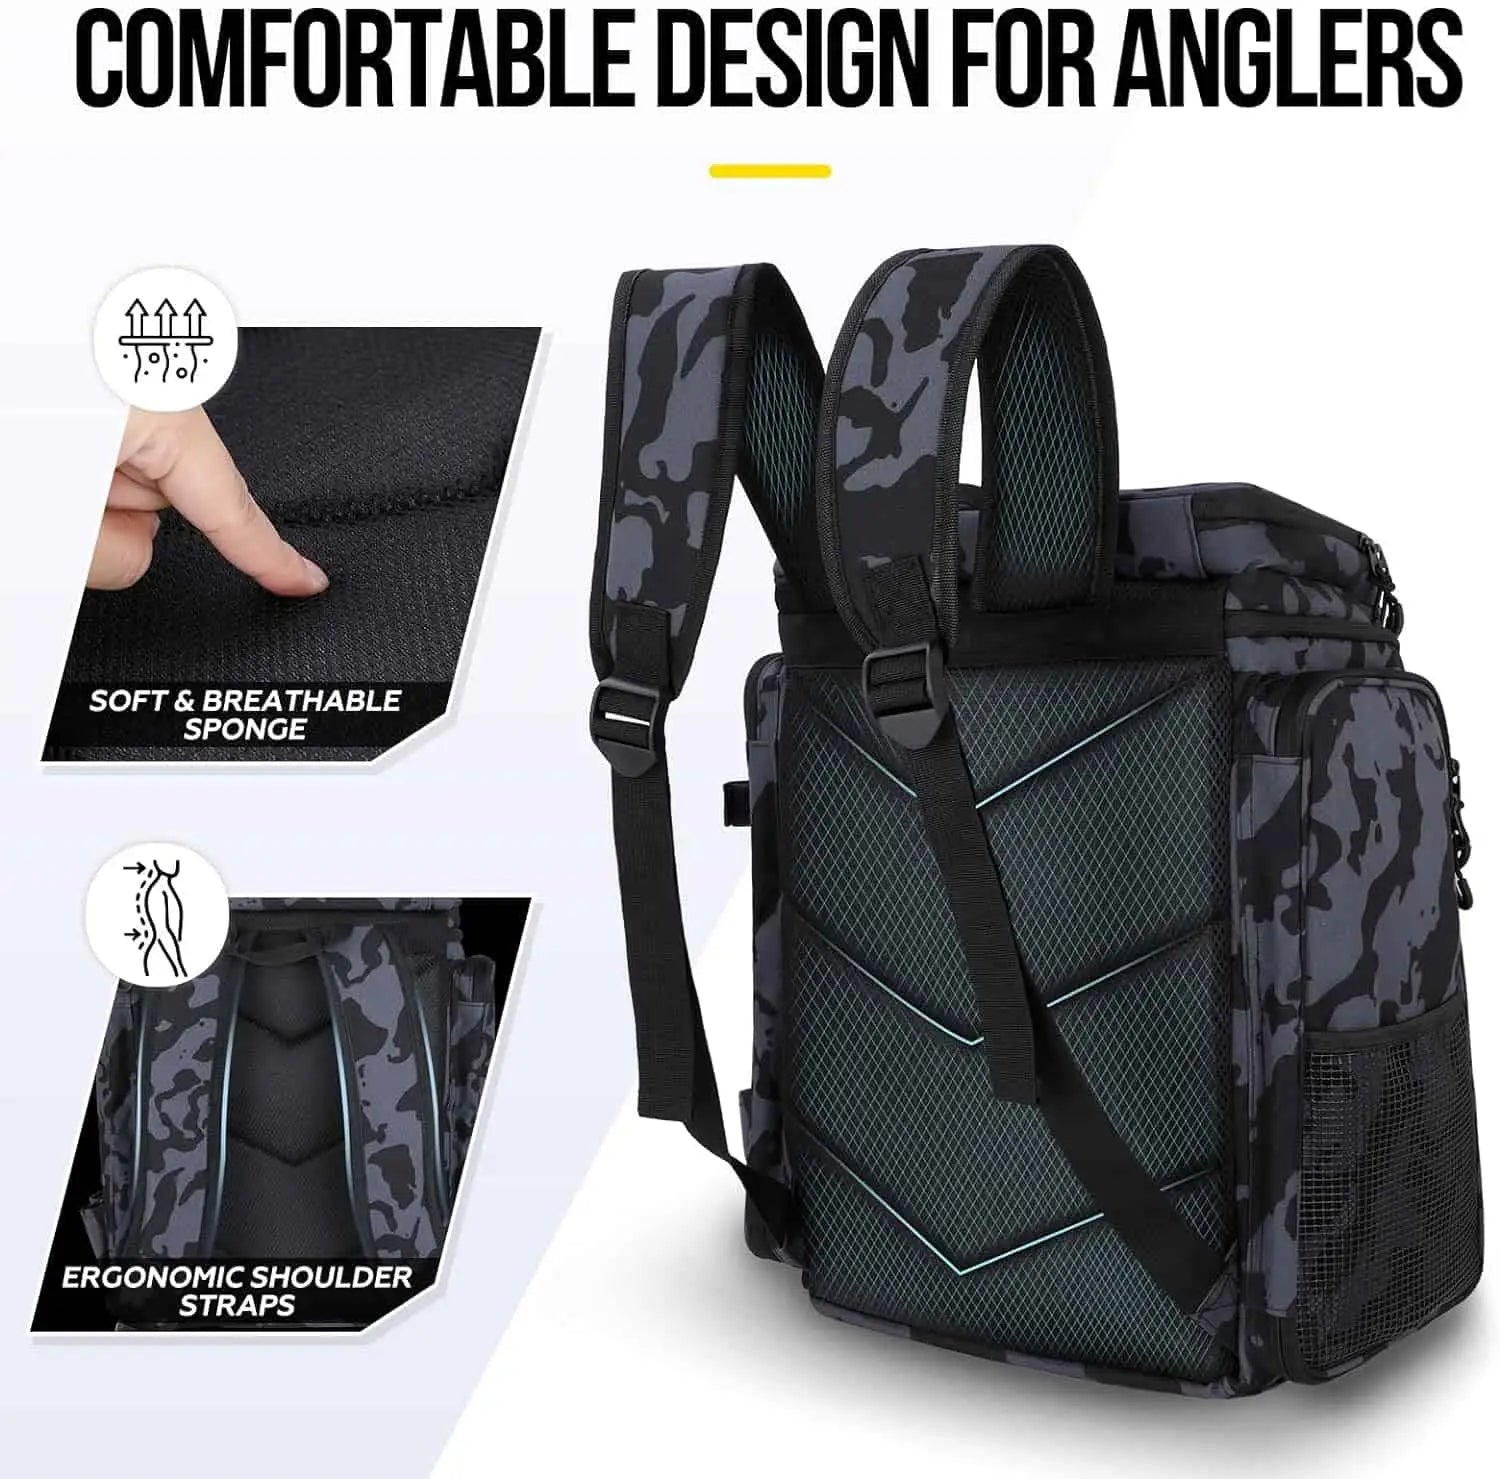 Fly Fishing Bag, Durable Canvas Black Practical Adjustable Shoulder Strap  Large Capacity Waterproof Fly Fishing Bag for Rod Fish Line Floating Box